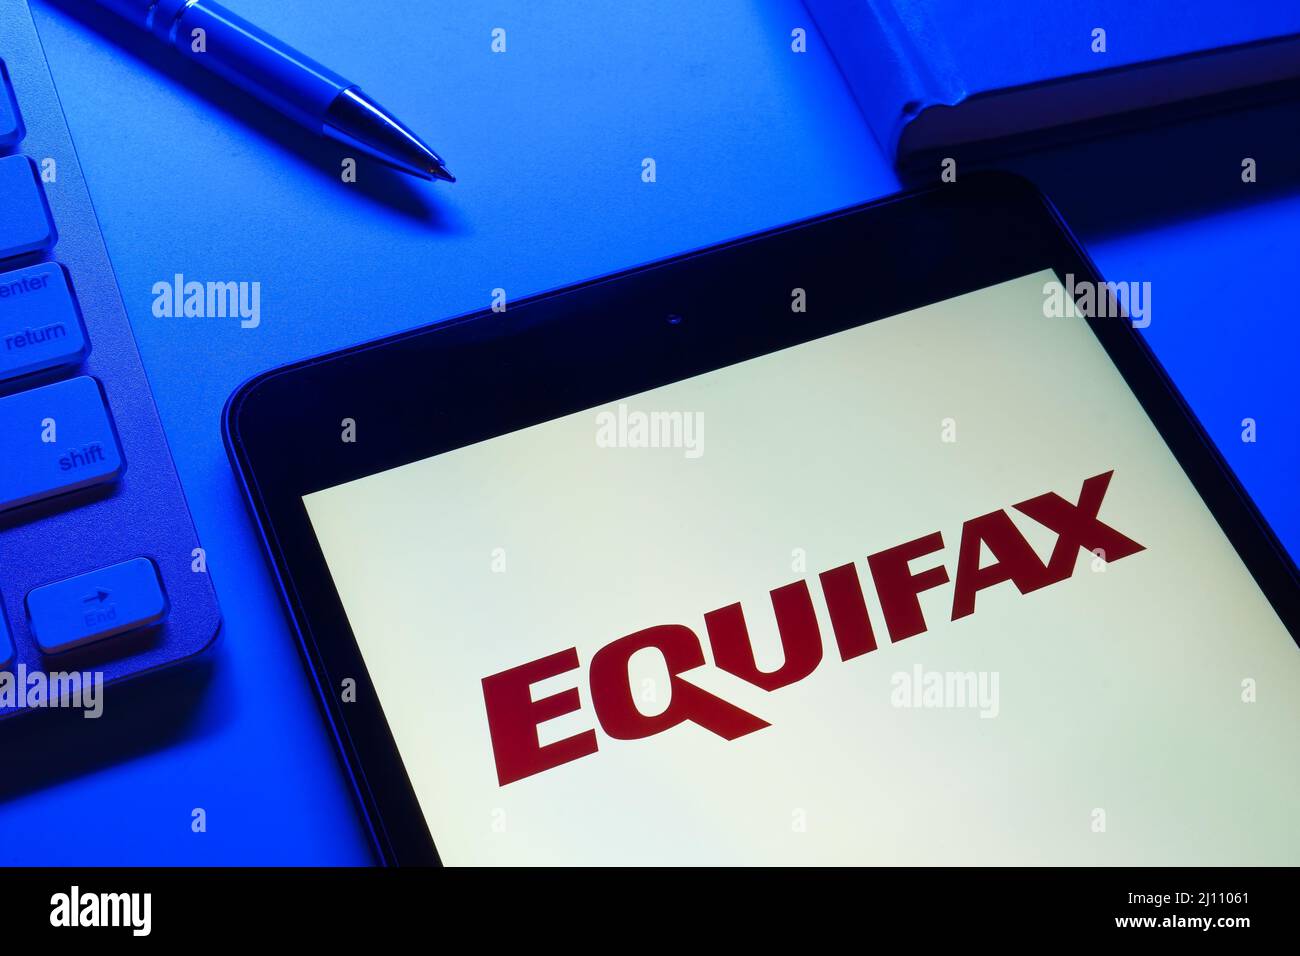 KYIV, UKRAINE - March 13, 2022. Device with Equifax logo on the screen. Stock Photo